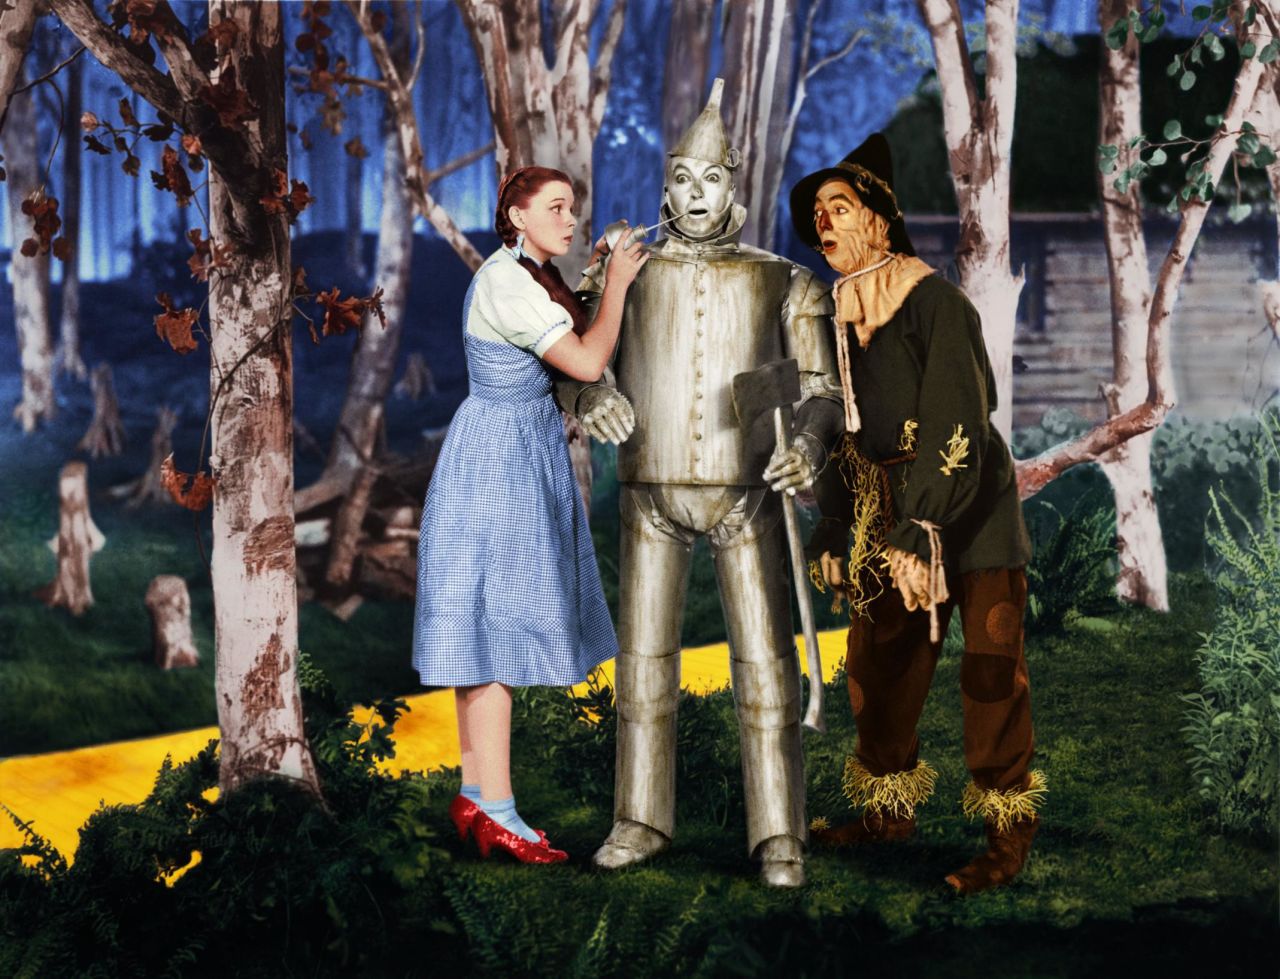 "I could stay young and chipper, and I'd lock it with a zipper, if I only had a heart," sung the Tin Man. 